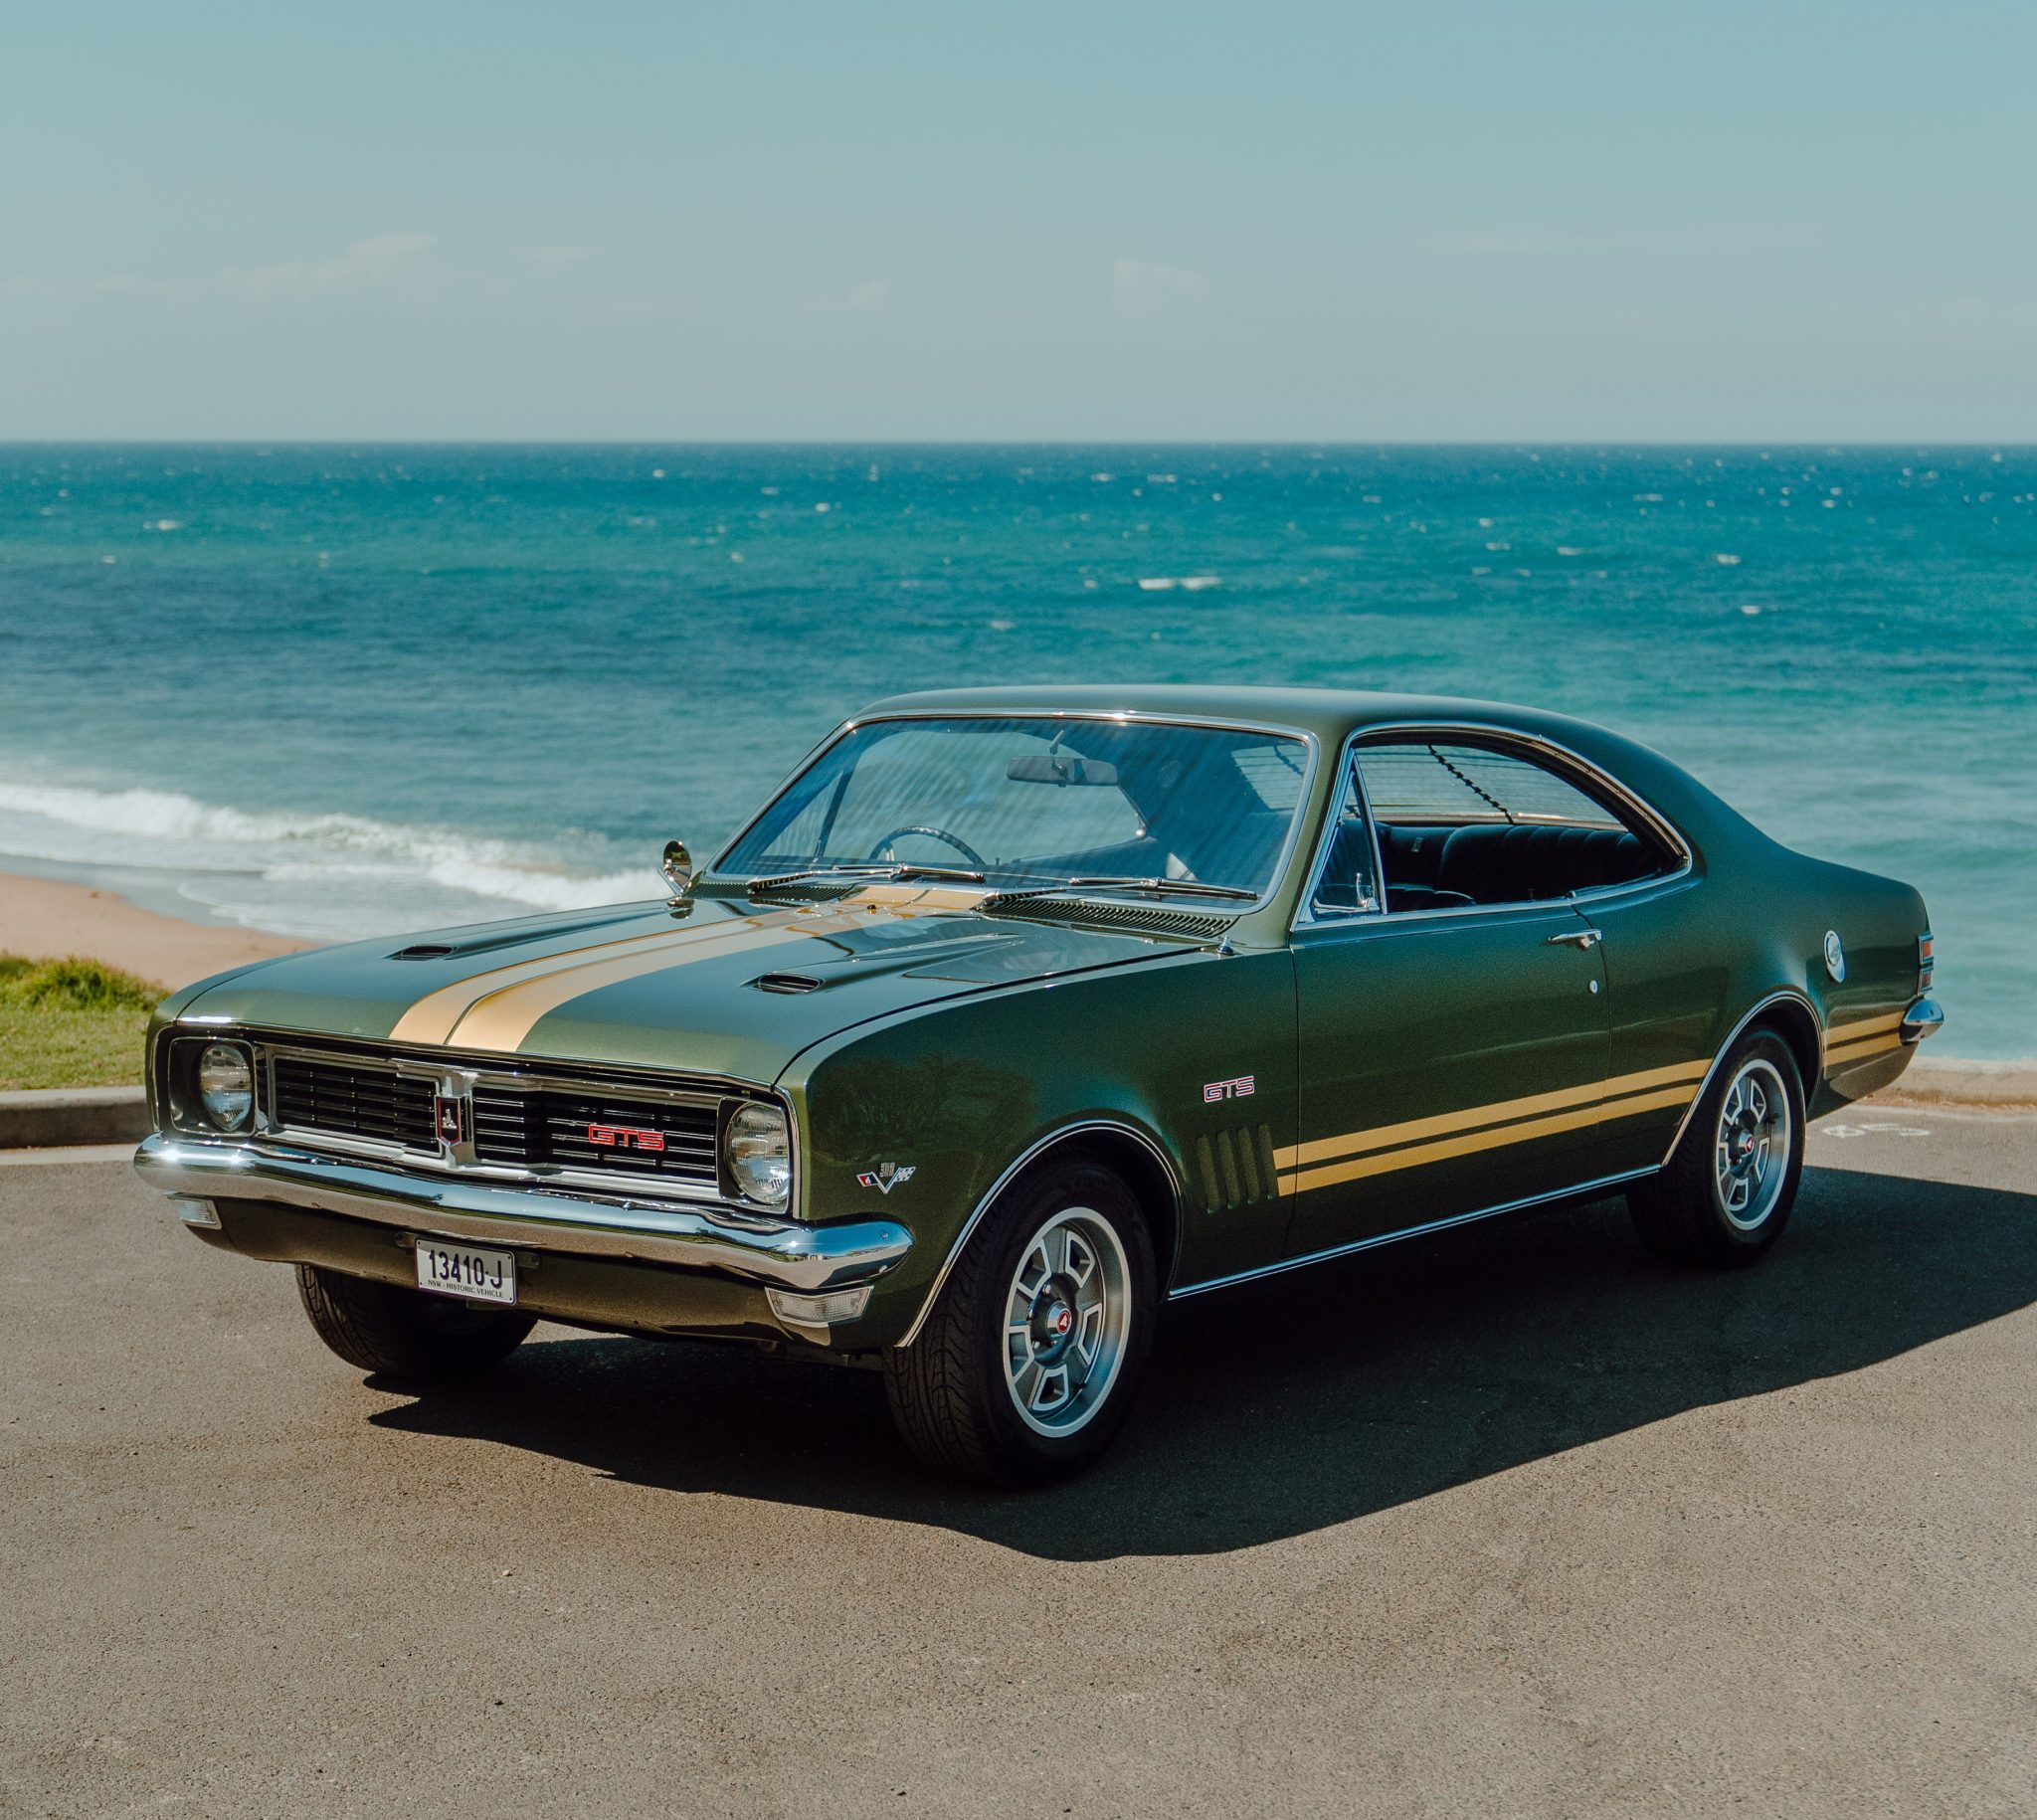 1969 Holden Monaro GTS Coupe at the beach